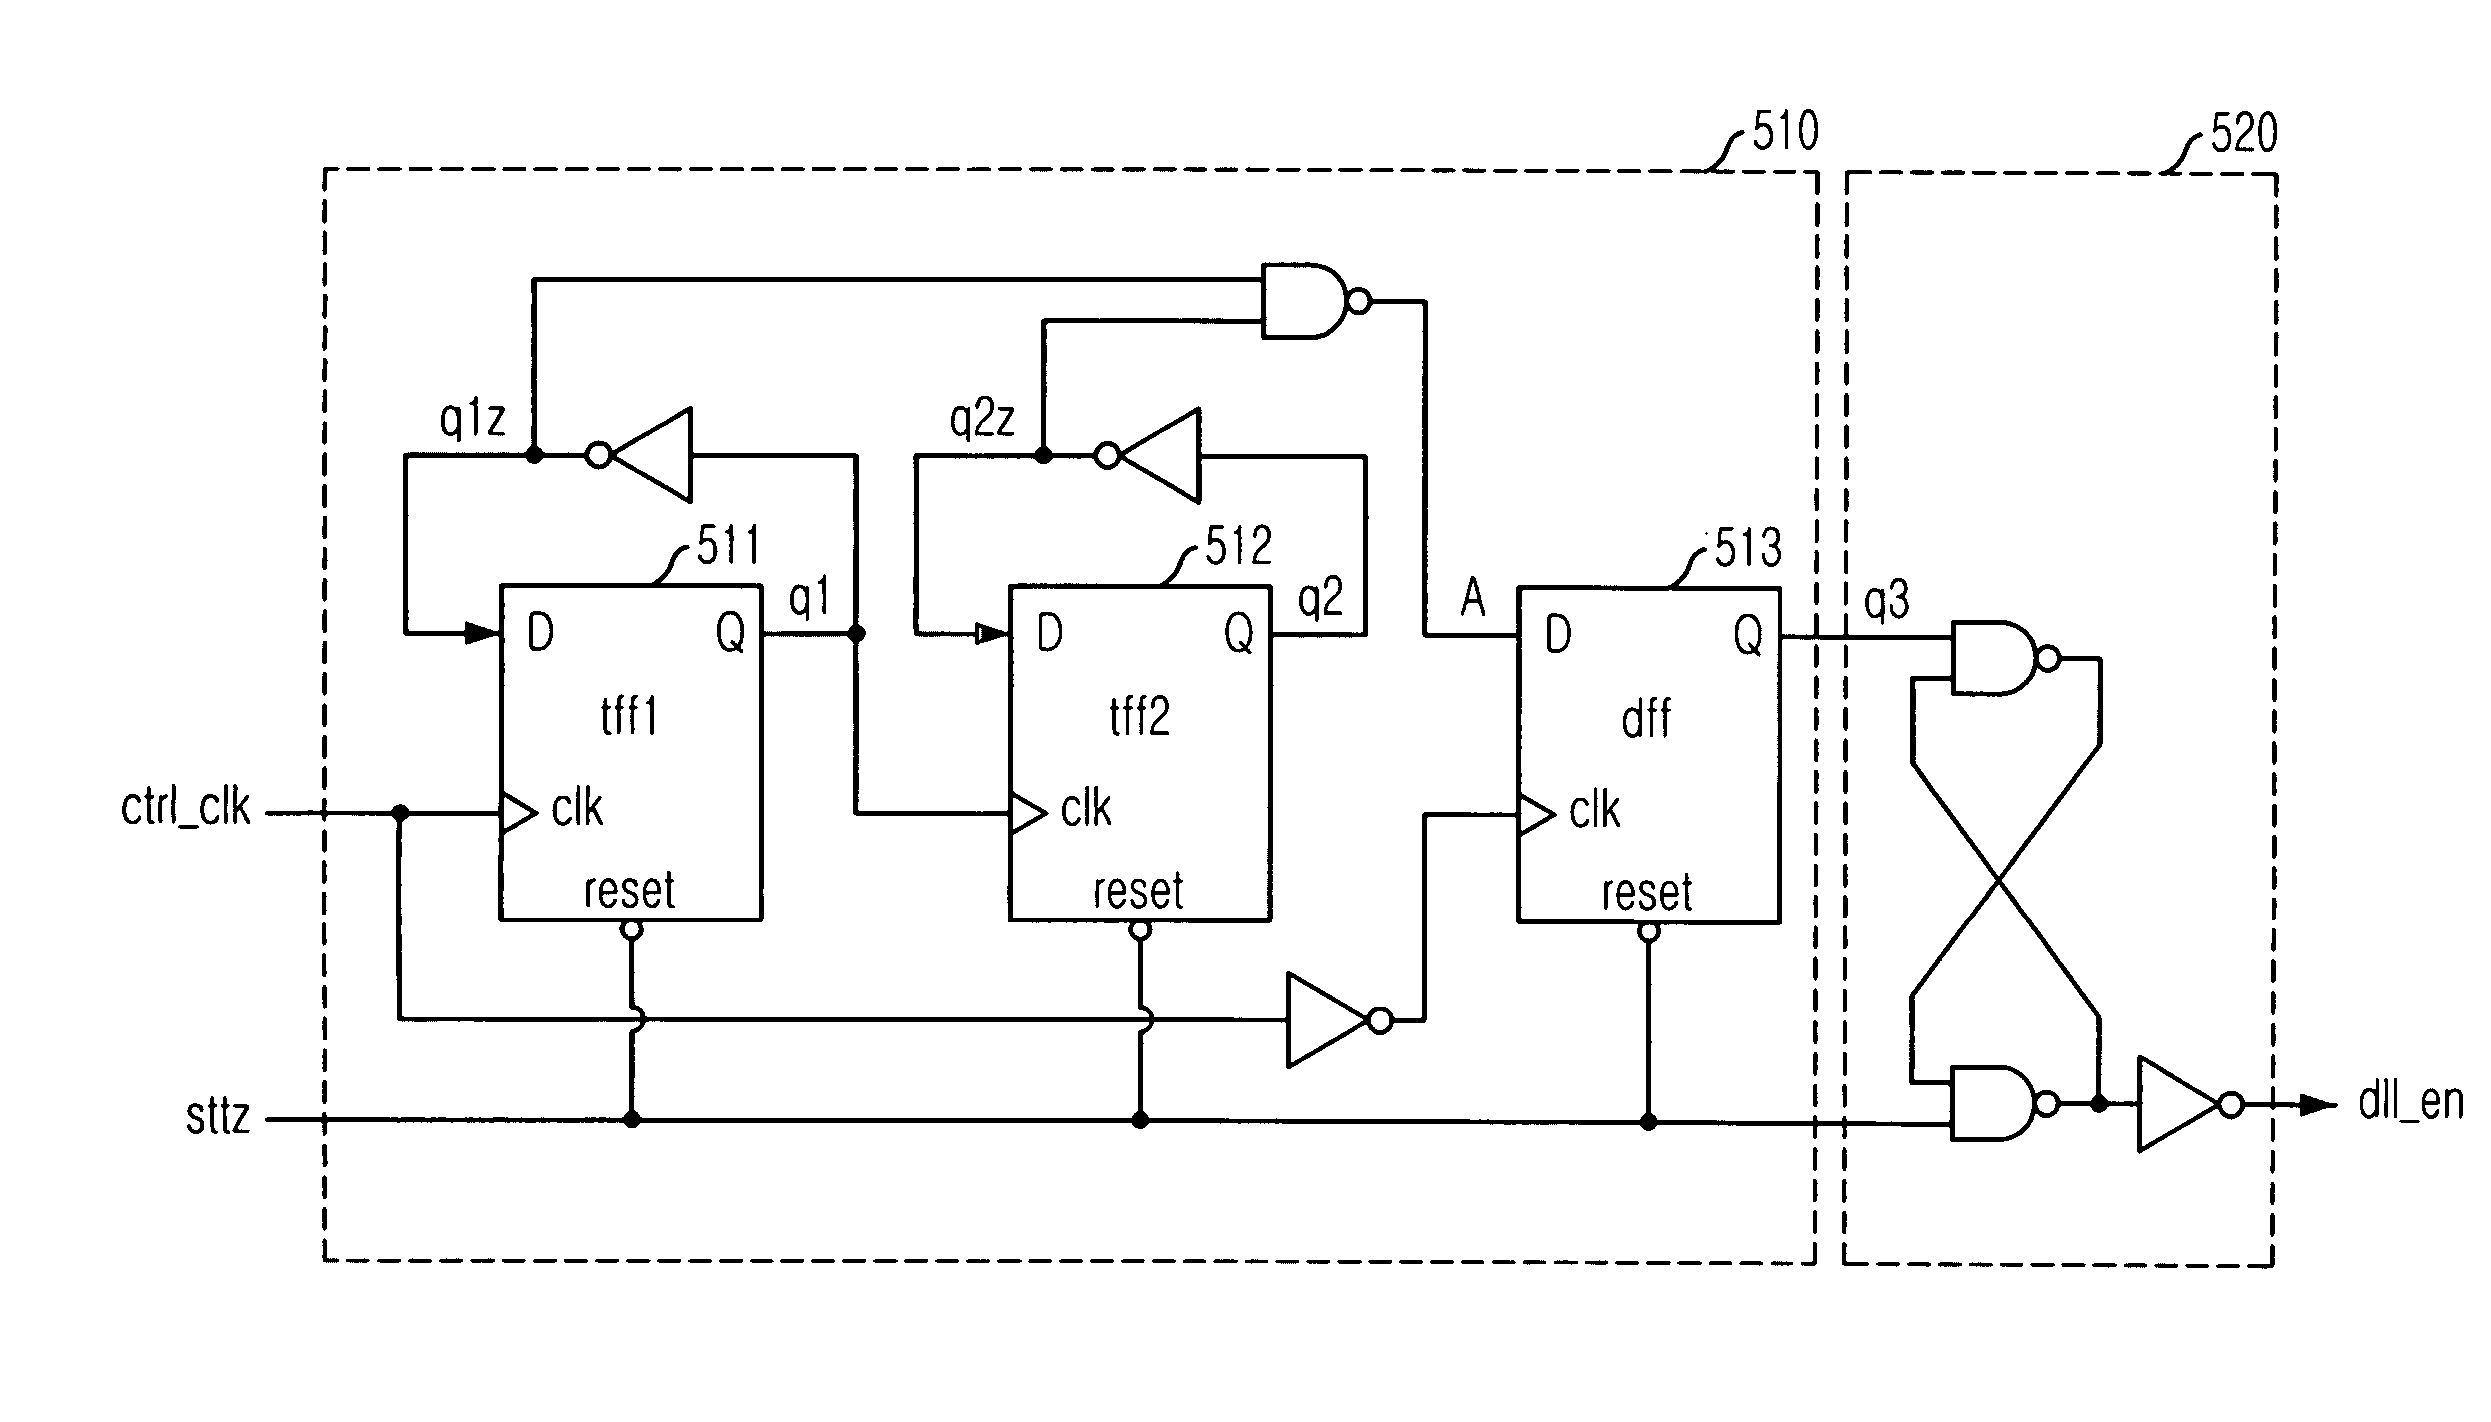 Delay locked loop in semiconductor memory device and locking method thereof